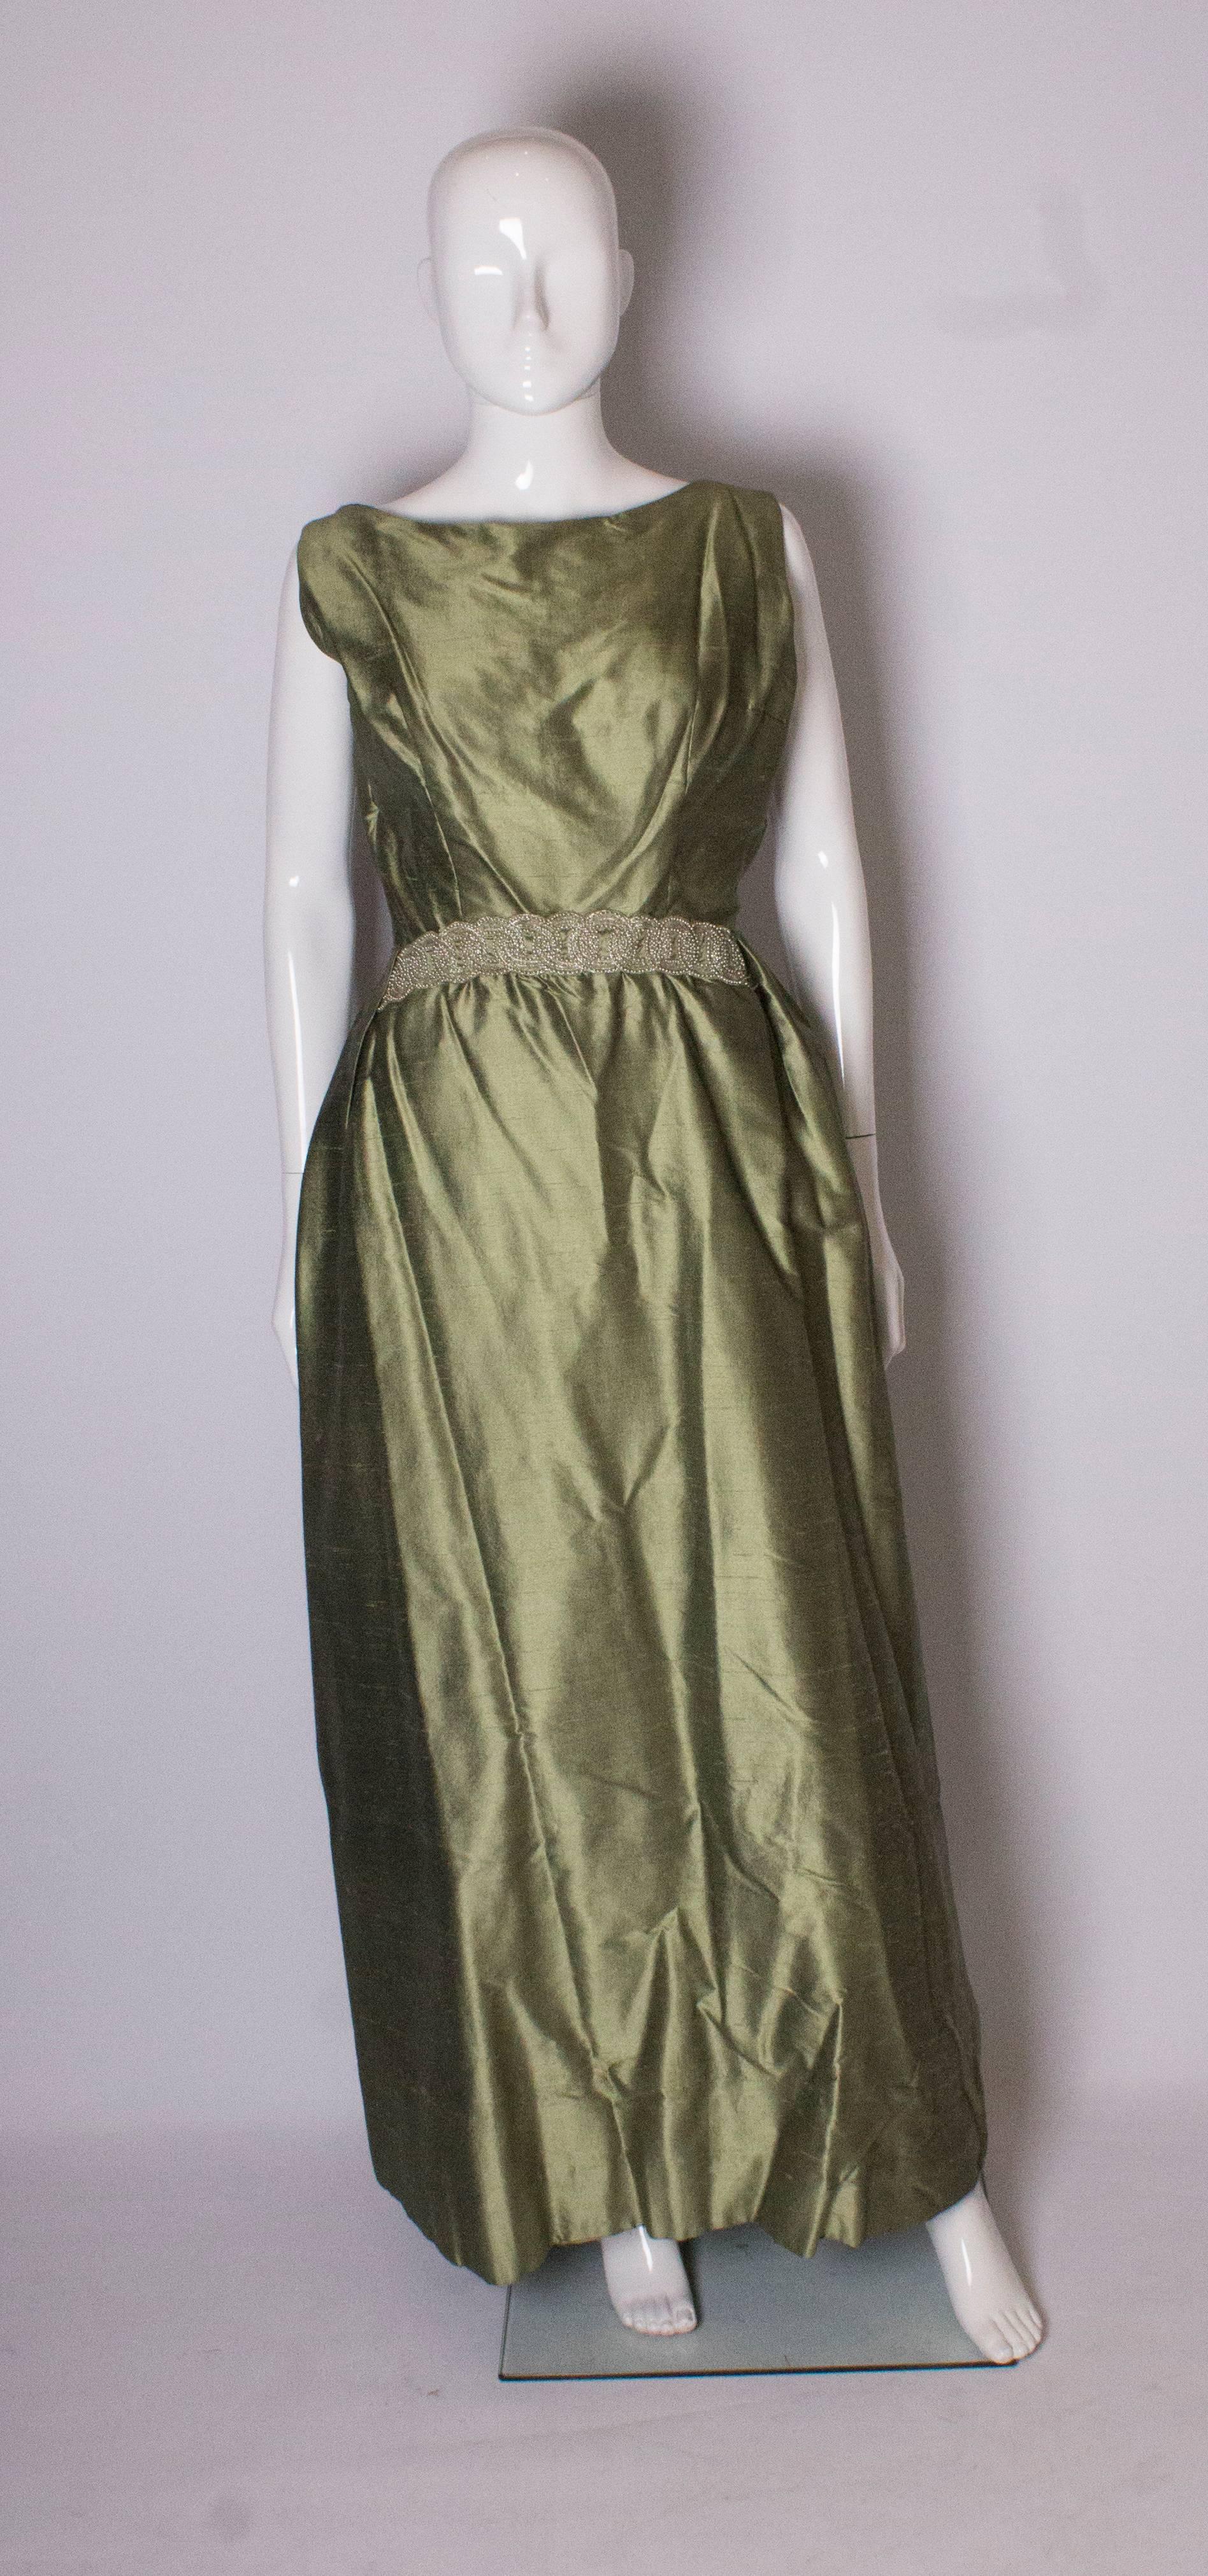 A pretty sage green silk ball gown /evening gown by Muriel Martin. The gown has a boat neckline at the front, and a square backneckline. There is a pretty beaded band that goes in and out at waist leval. It is fully lined with burgundy net and sage